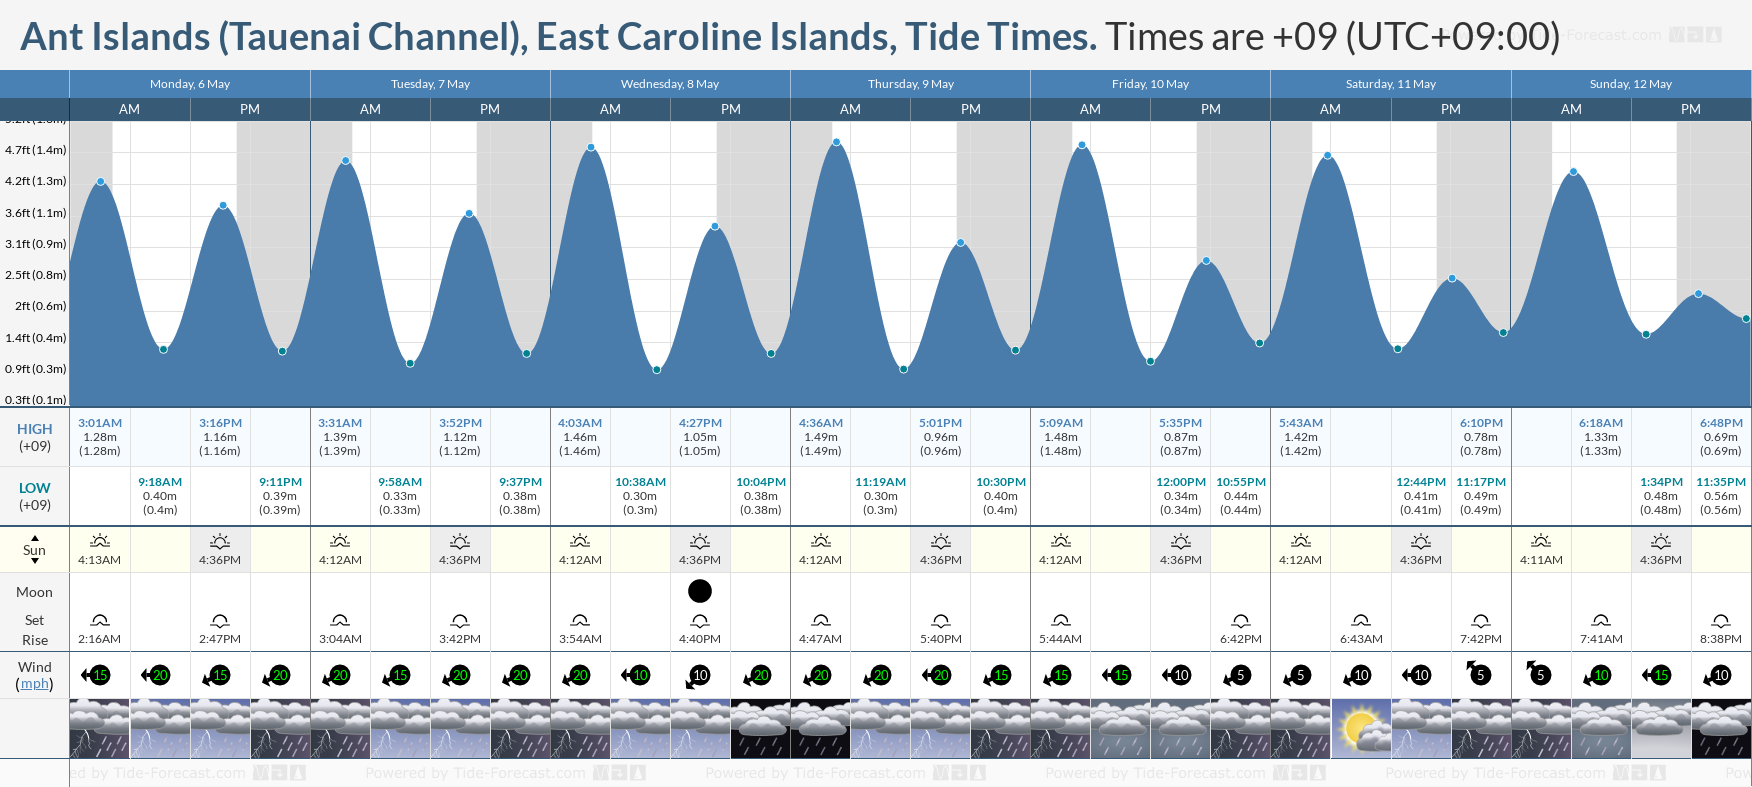 Ant Islands (Tauenai Channel), East Caroline Islands Tide Chart including high and low tide tide times for the next 7 days